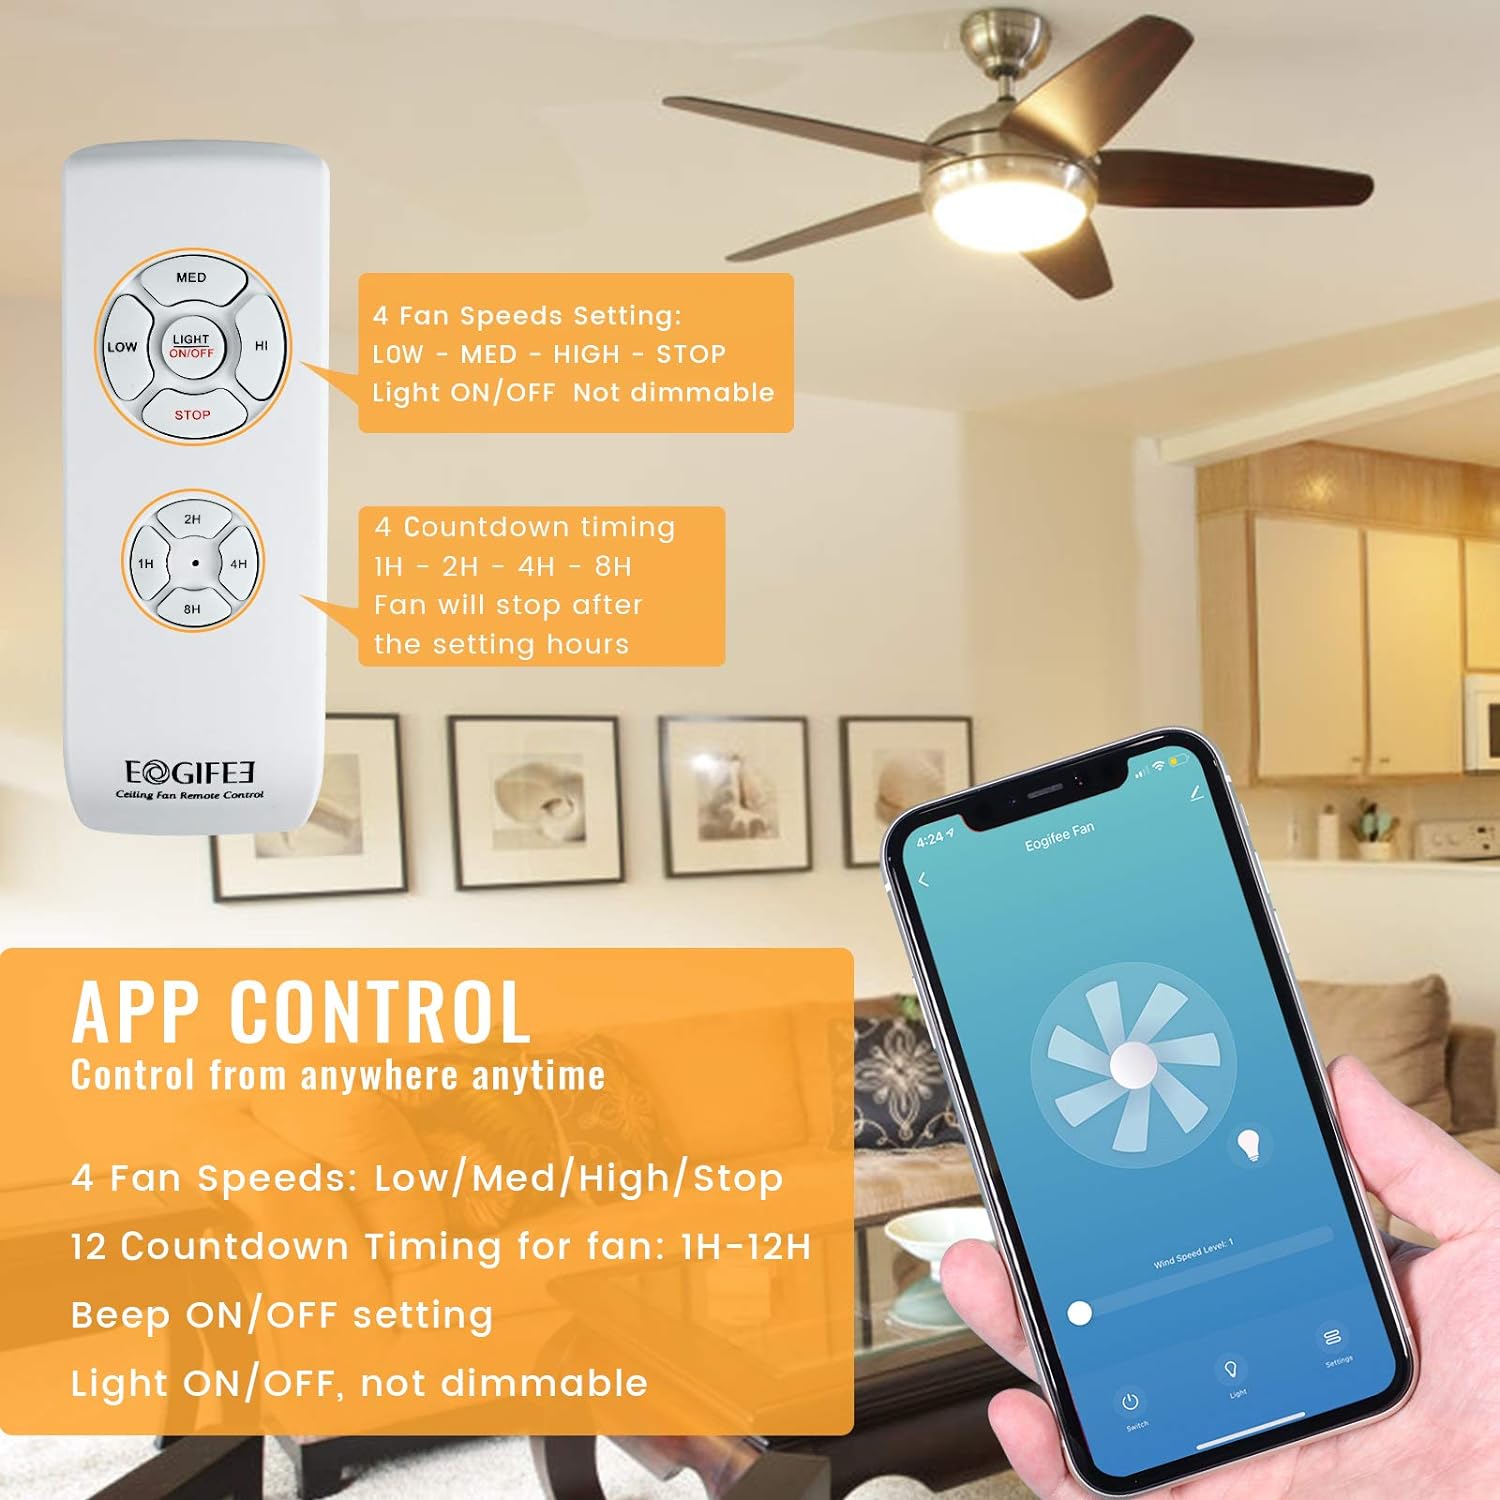 Eogifee Ish09 M960681mn Smart Wifi Ceiling Fan Remote Control Kit Universal Small Size Receiver 12 Hours Countdown Timing 4 Sds Compatible With Echo - Is There A Universal Ceiling Fan Remote App